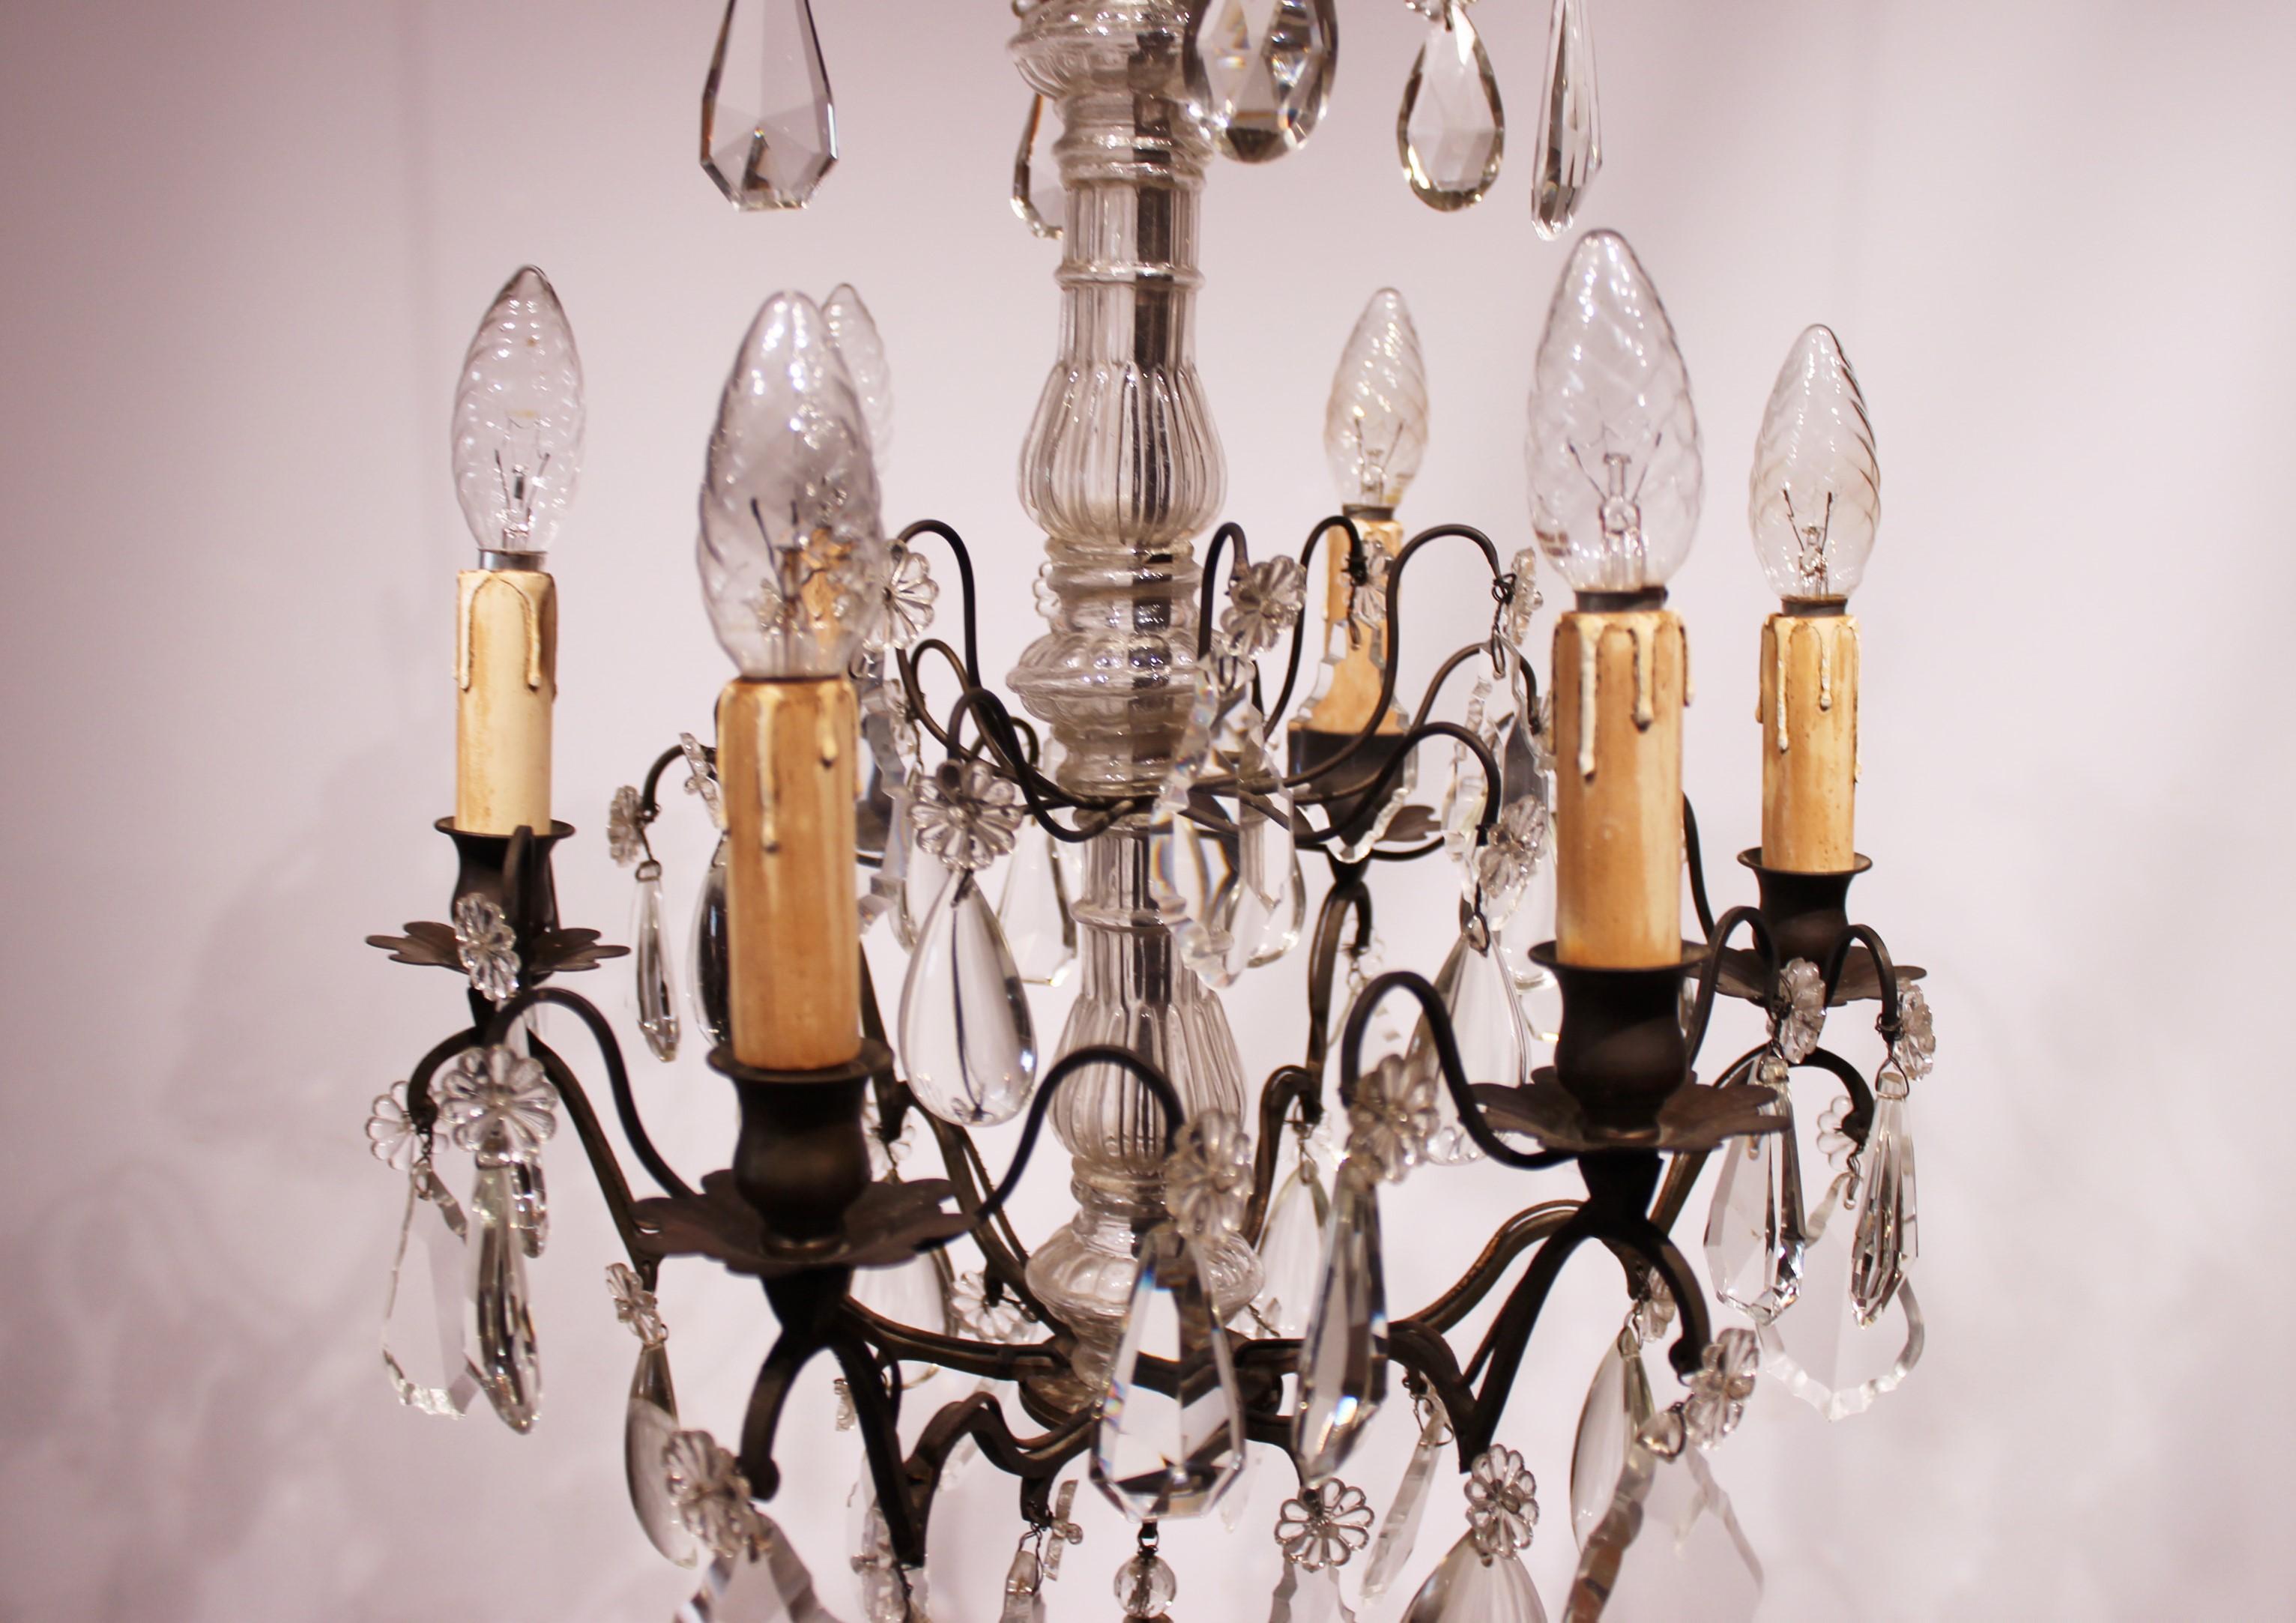 Chandelier made of brass and polished prisms. The chandelier is from France and manufactured circa 1920s. The item is in great antique condition.